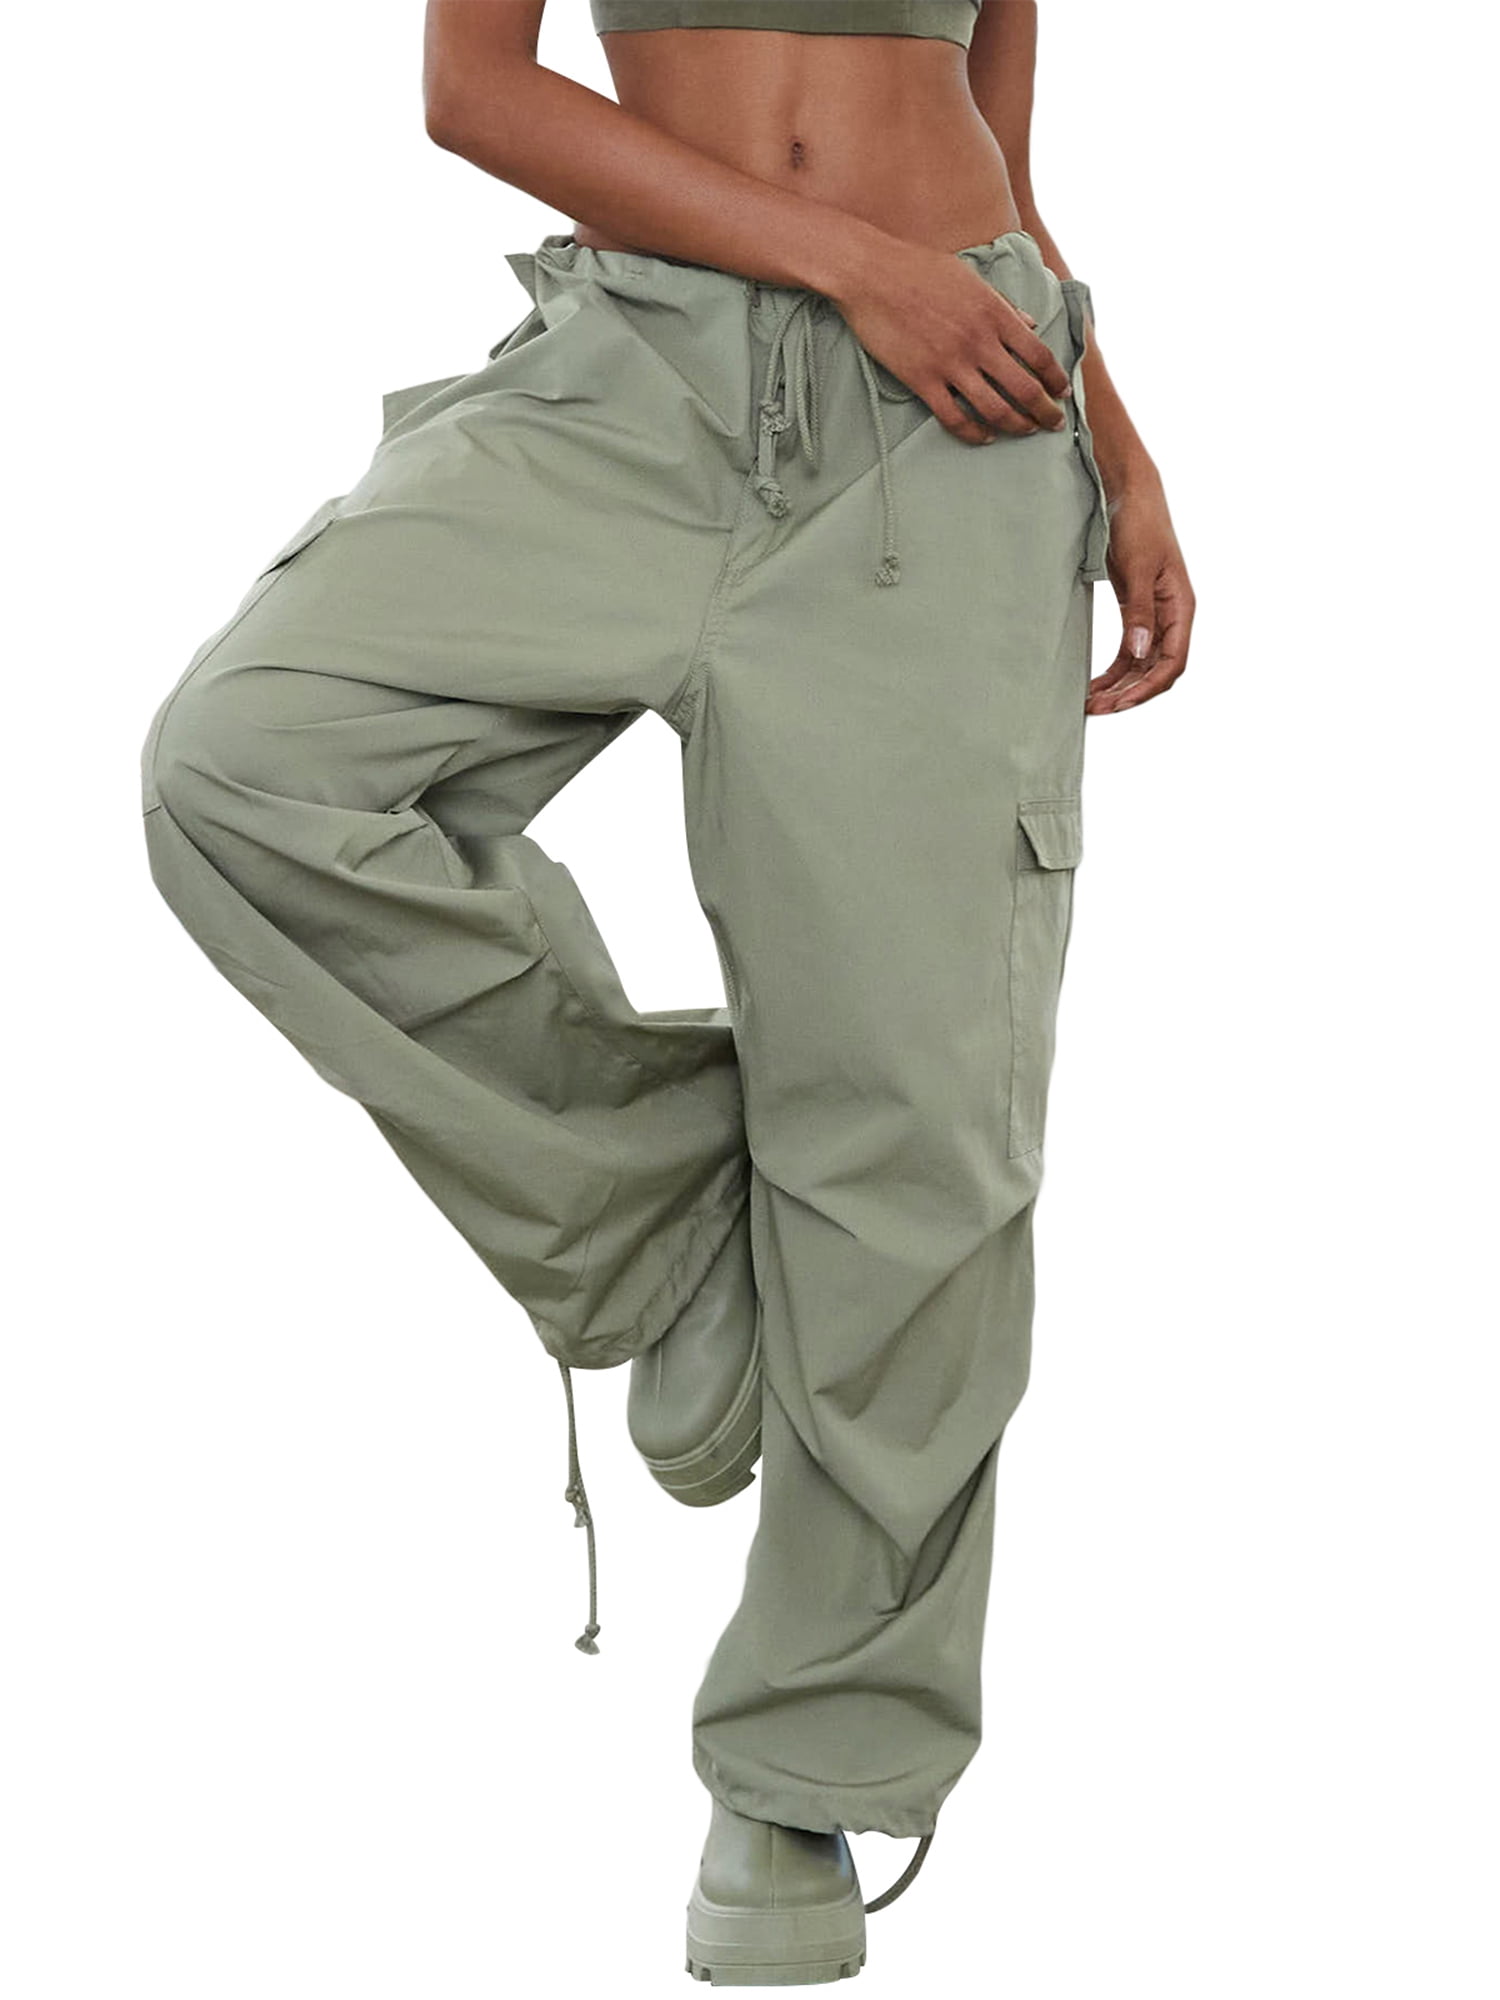 Women Drawstring Cargo Pants With Pocket Loose Baggy Sweatpants Summer  Spring Long Sports Dance Trousers Streetwear 